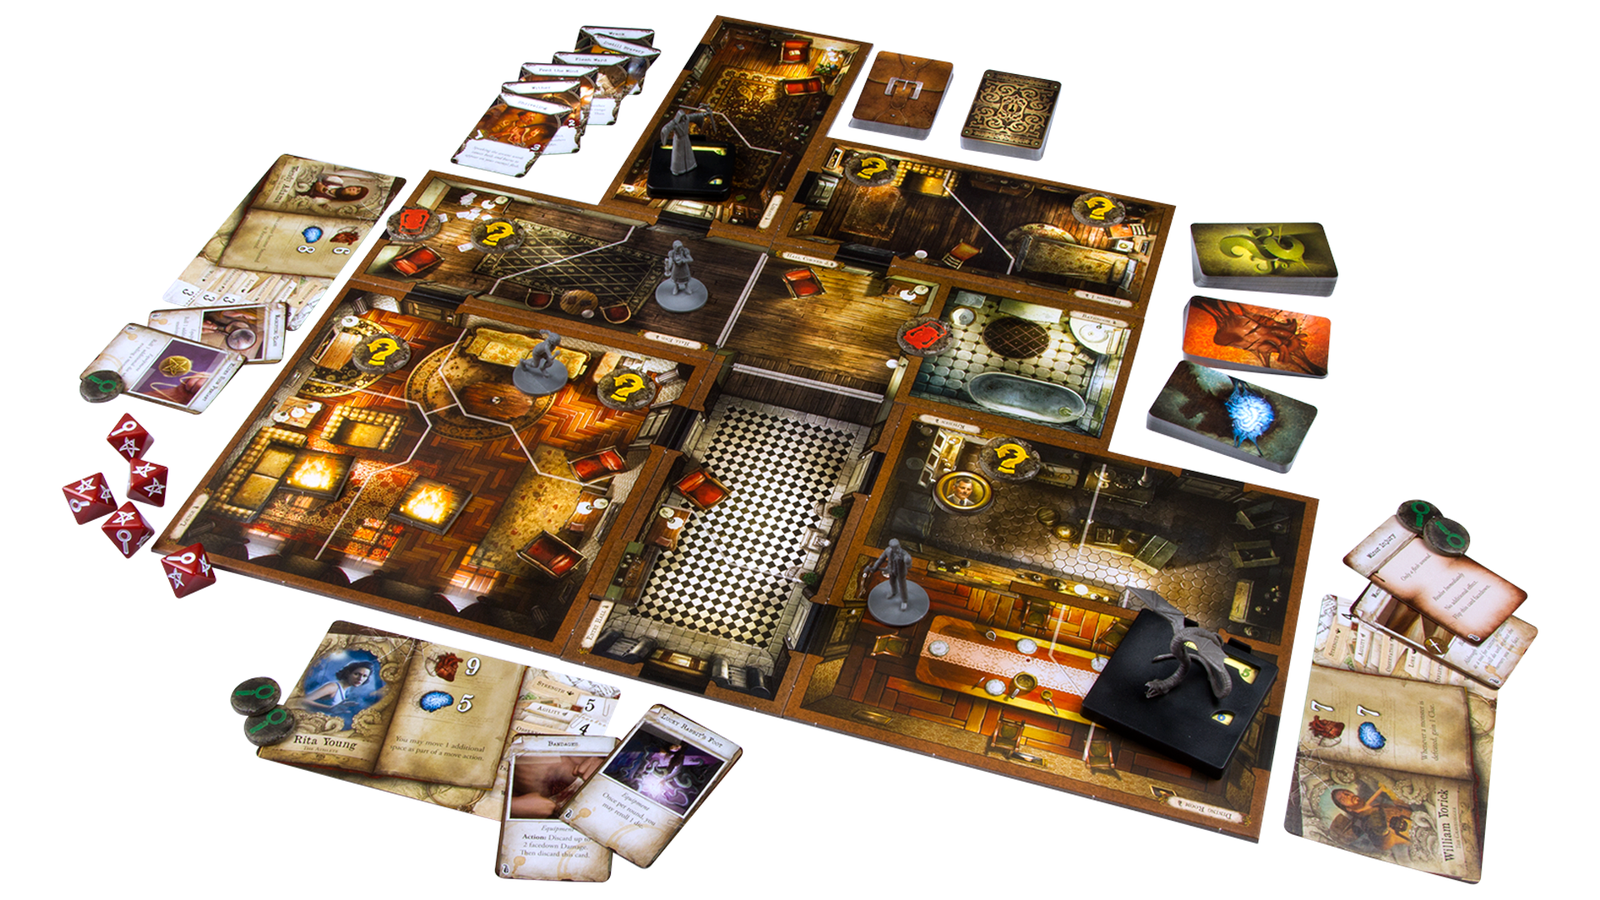 There are no more Mansions of Madness 2E expansions on the way